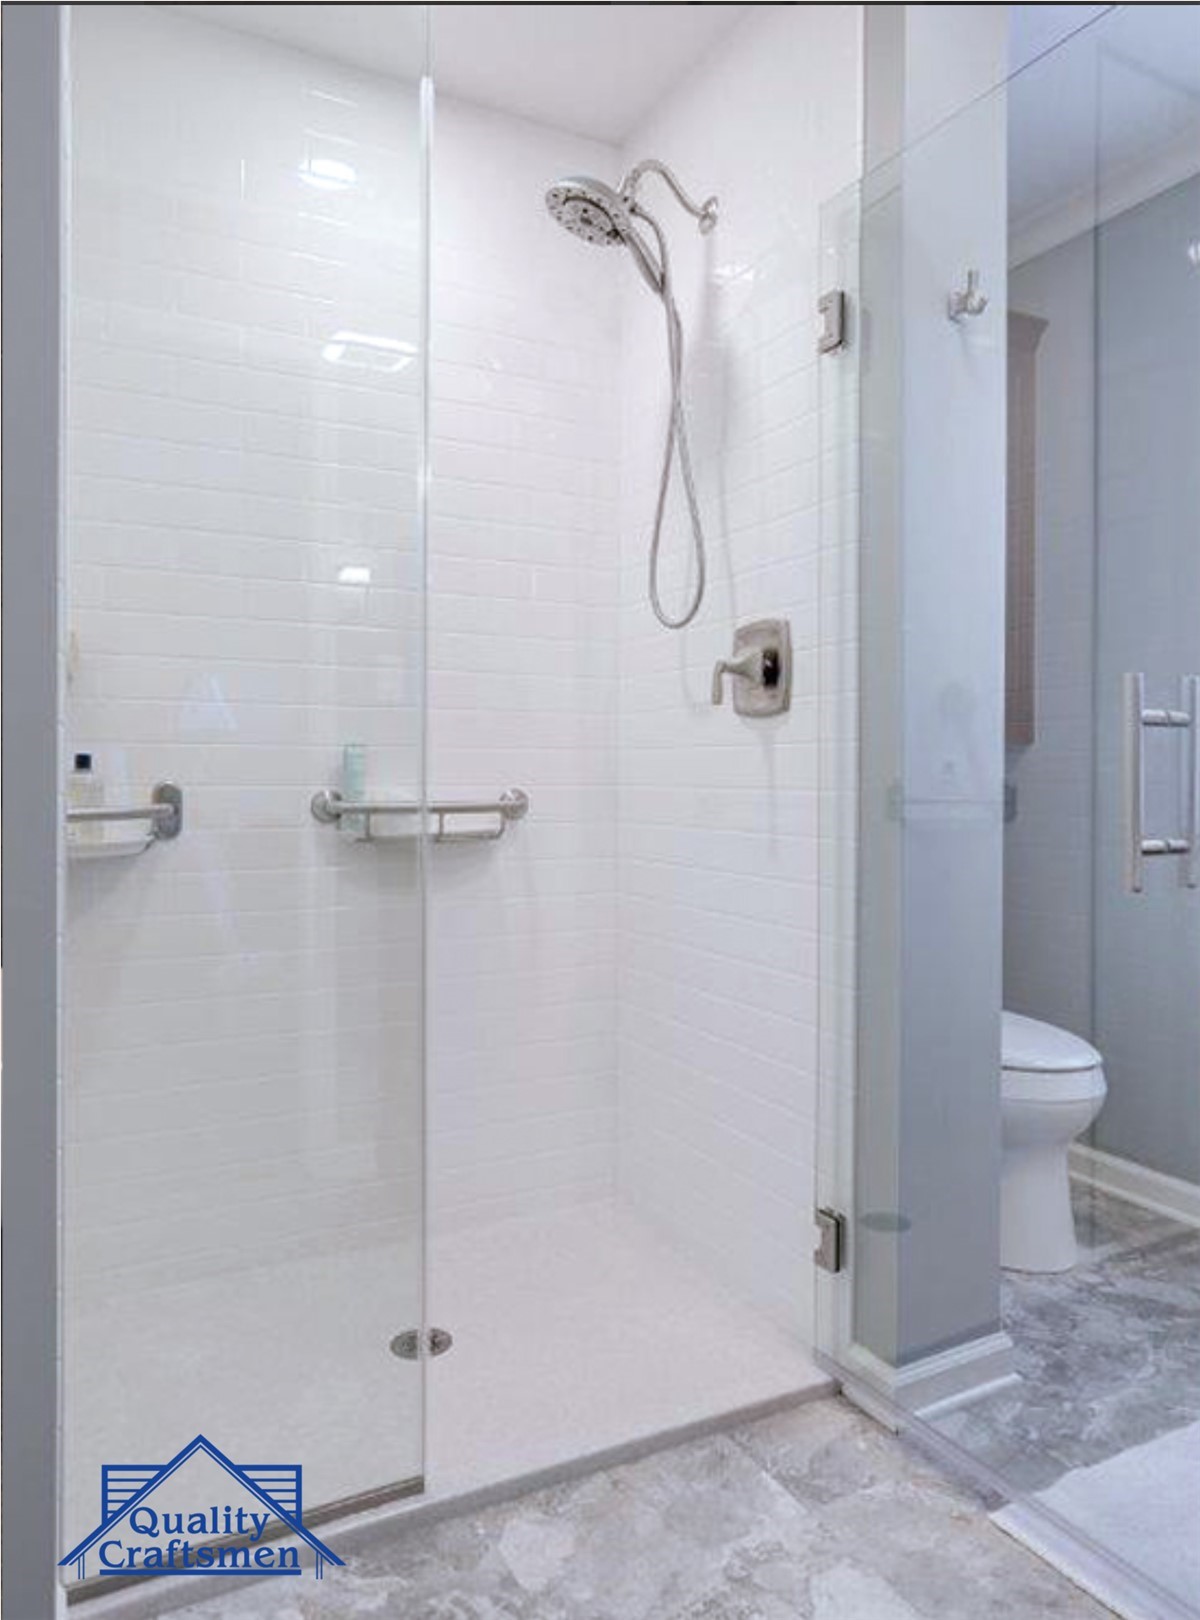 Add Texture and Reduce Costs with Simulated Tile Shower Walls